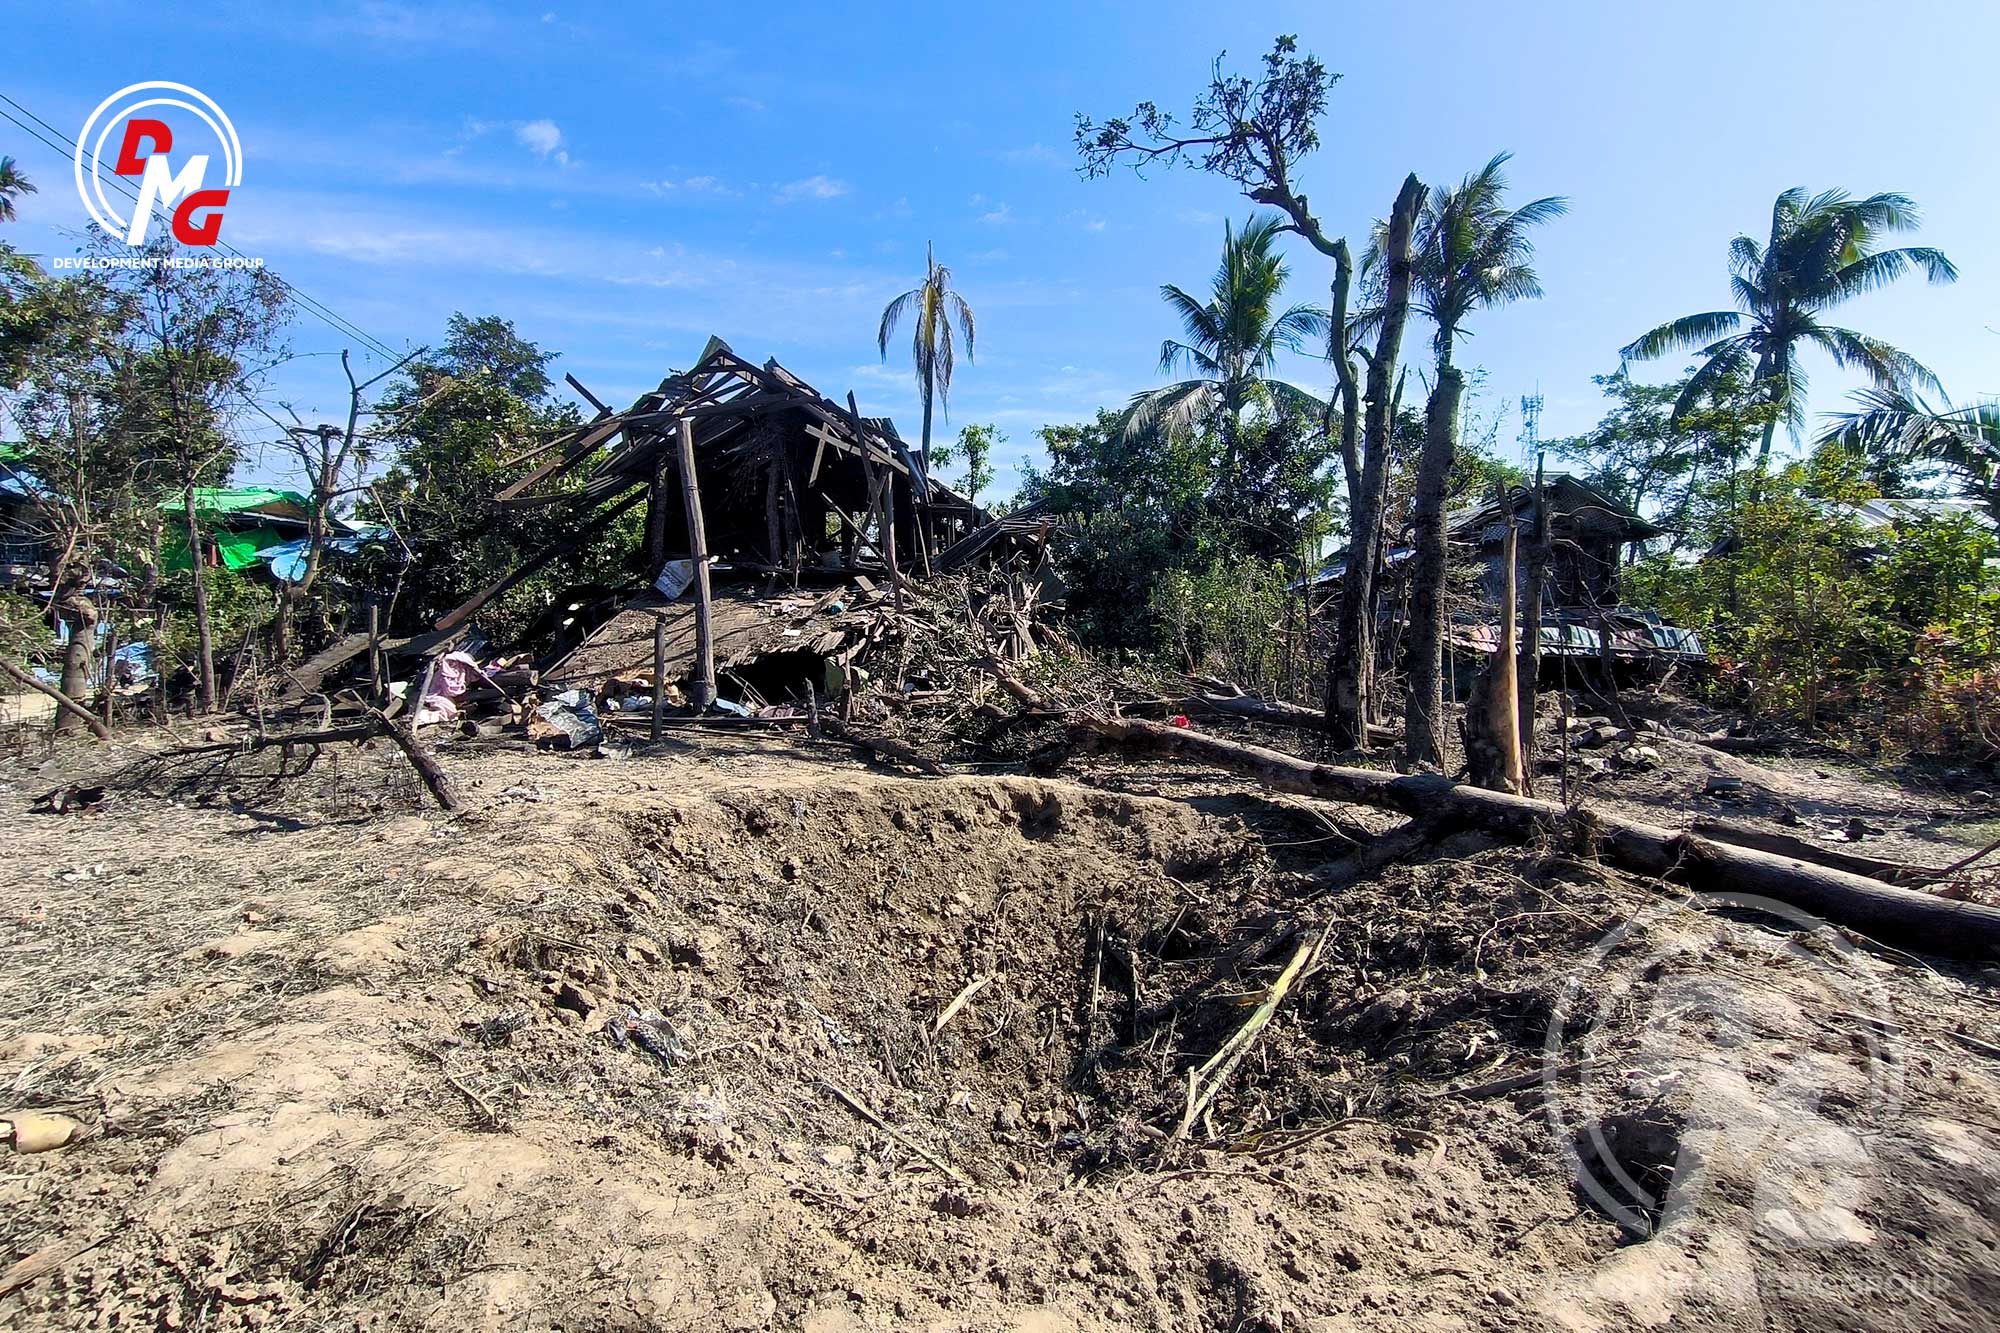 Apaukwa Village in Kyauktaw Township was subject to one of the junta’s bombing raids.